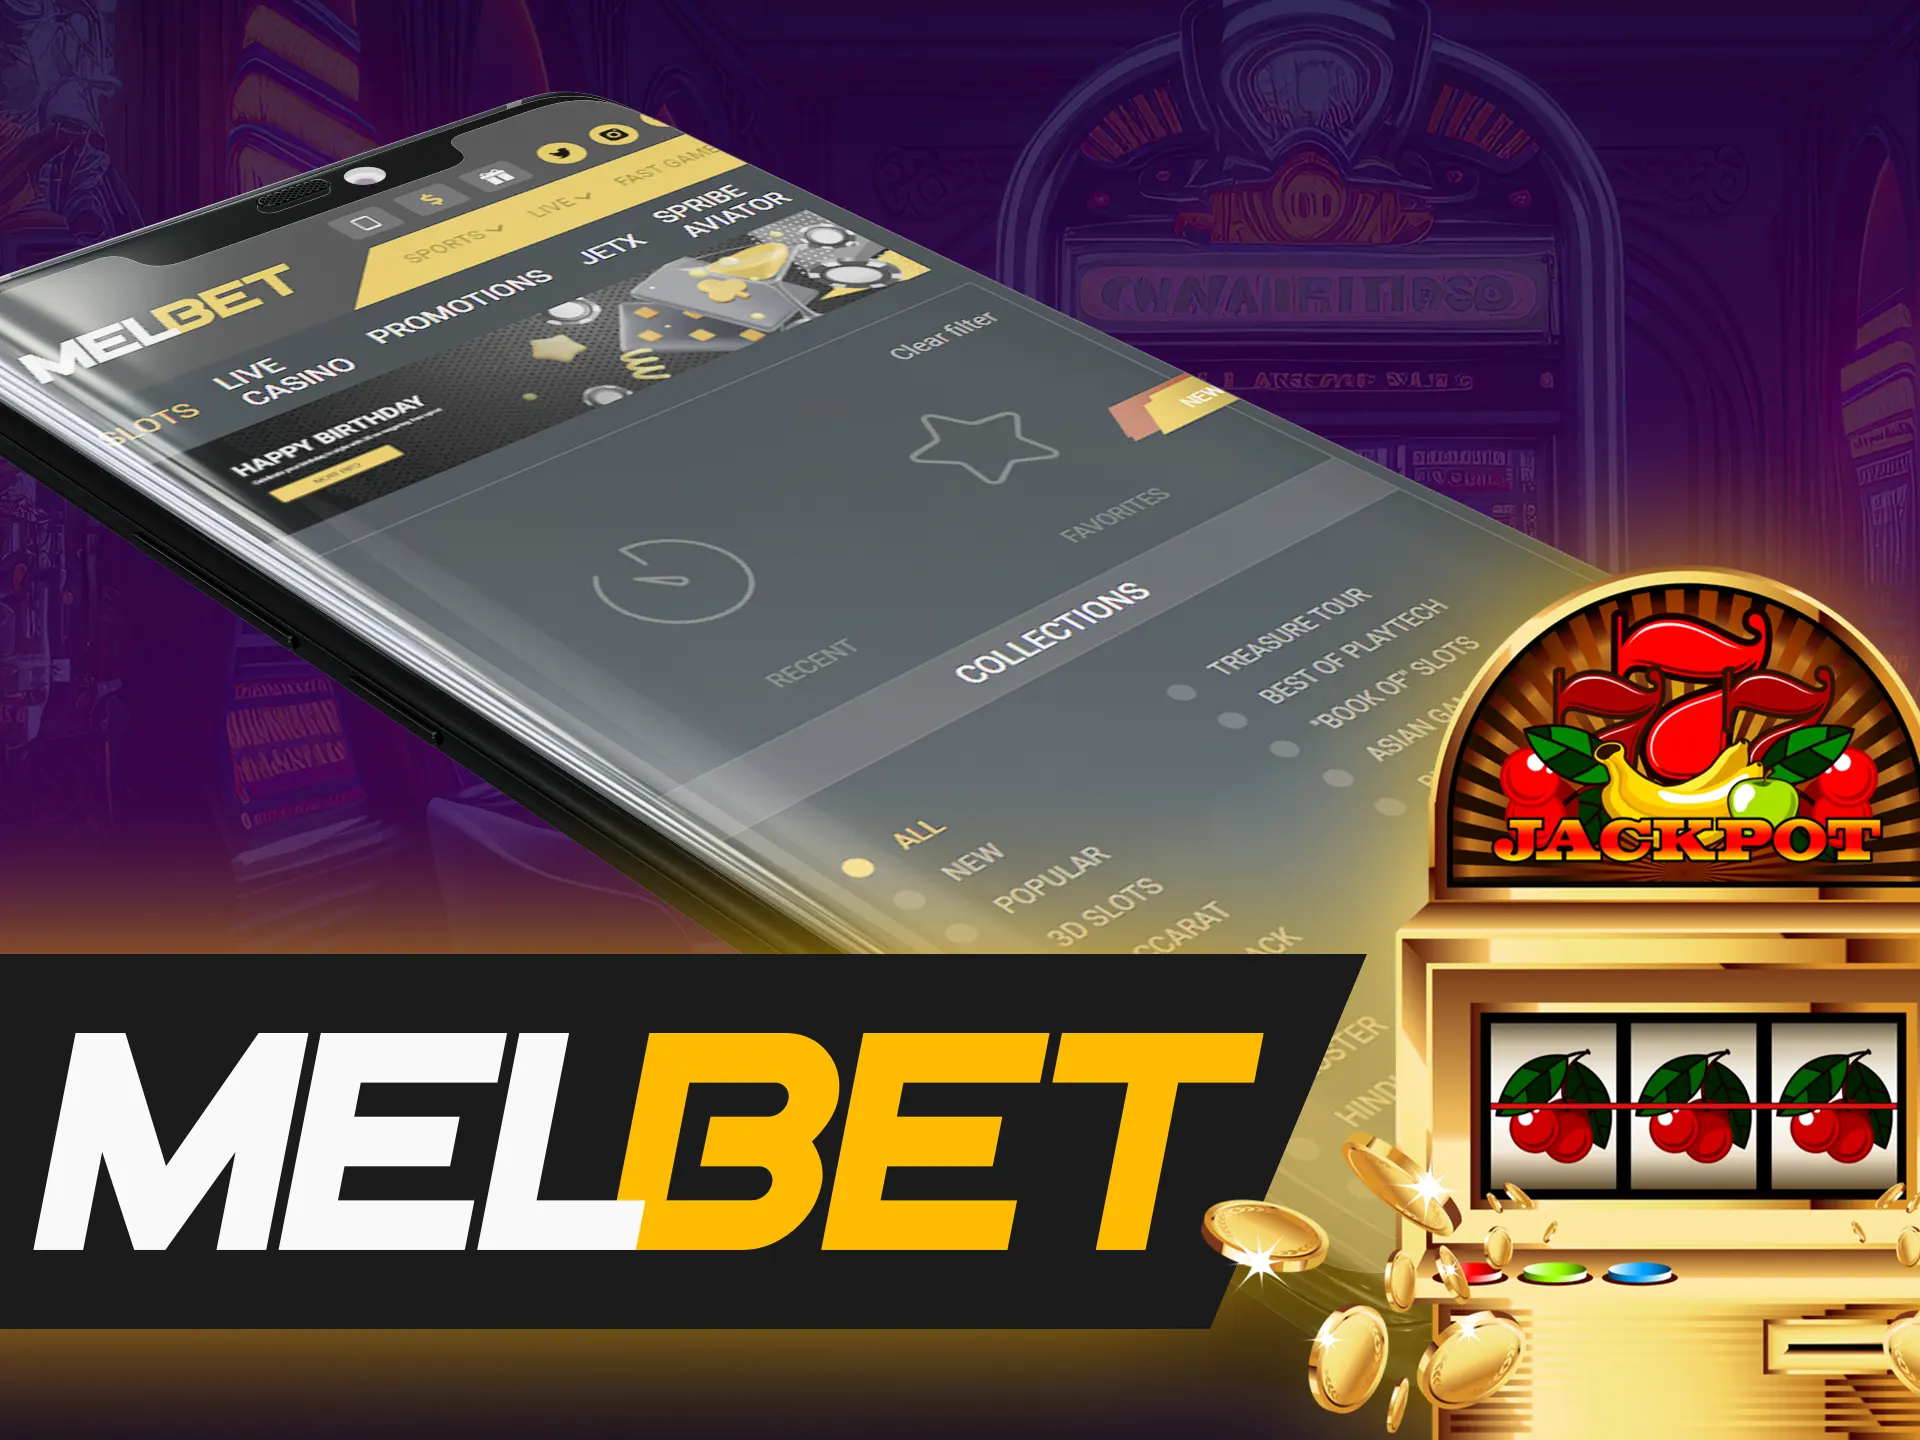 Play any slots with Melbet app.